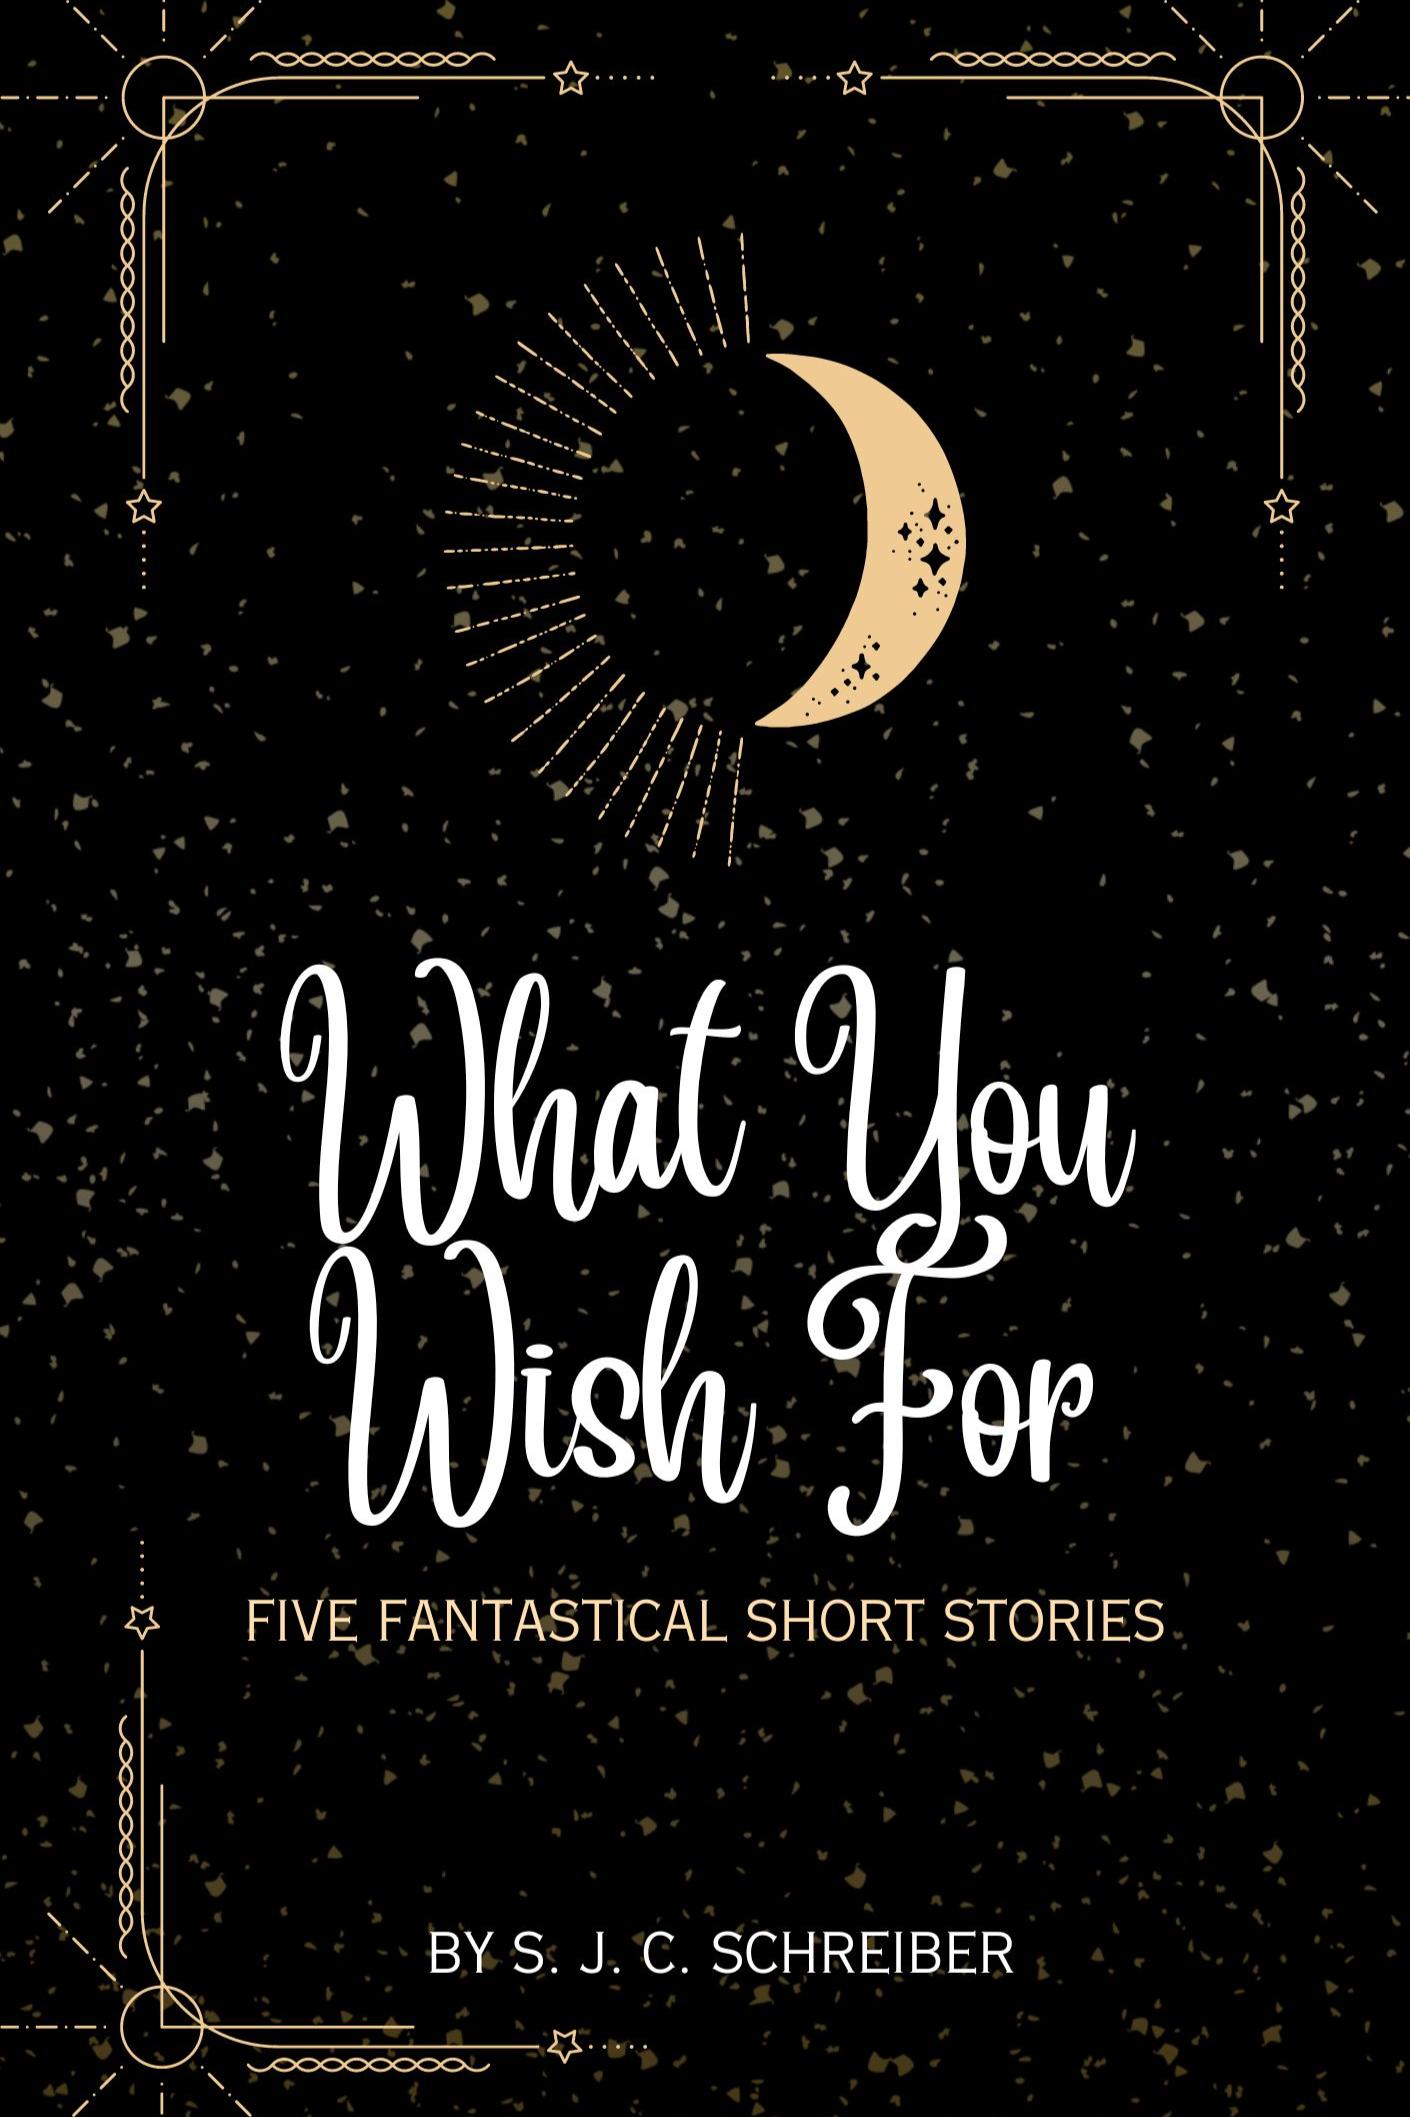 Book cover of What You Wish For: 5 Fantastical Short Stories by S. J. C. Schreiber